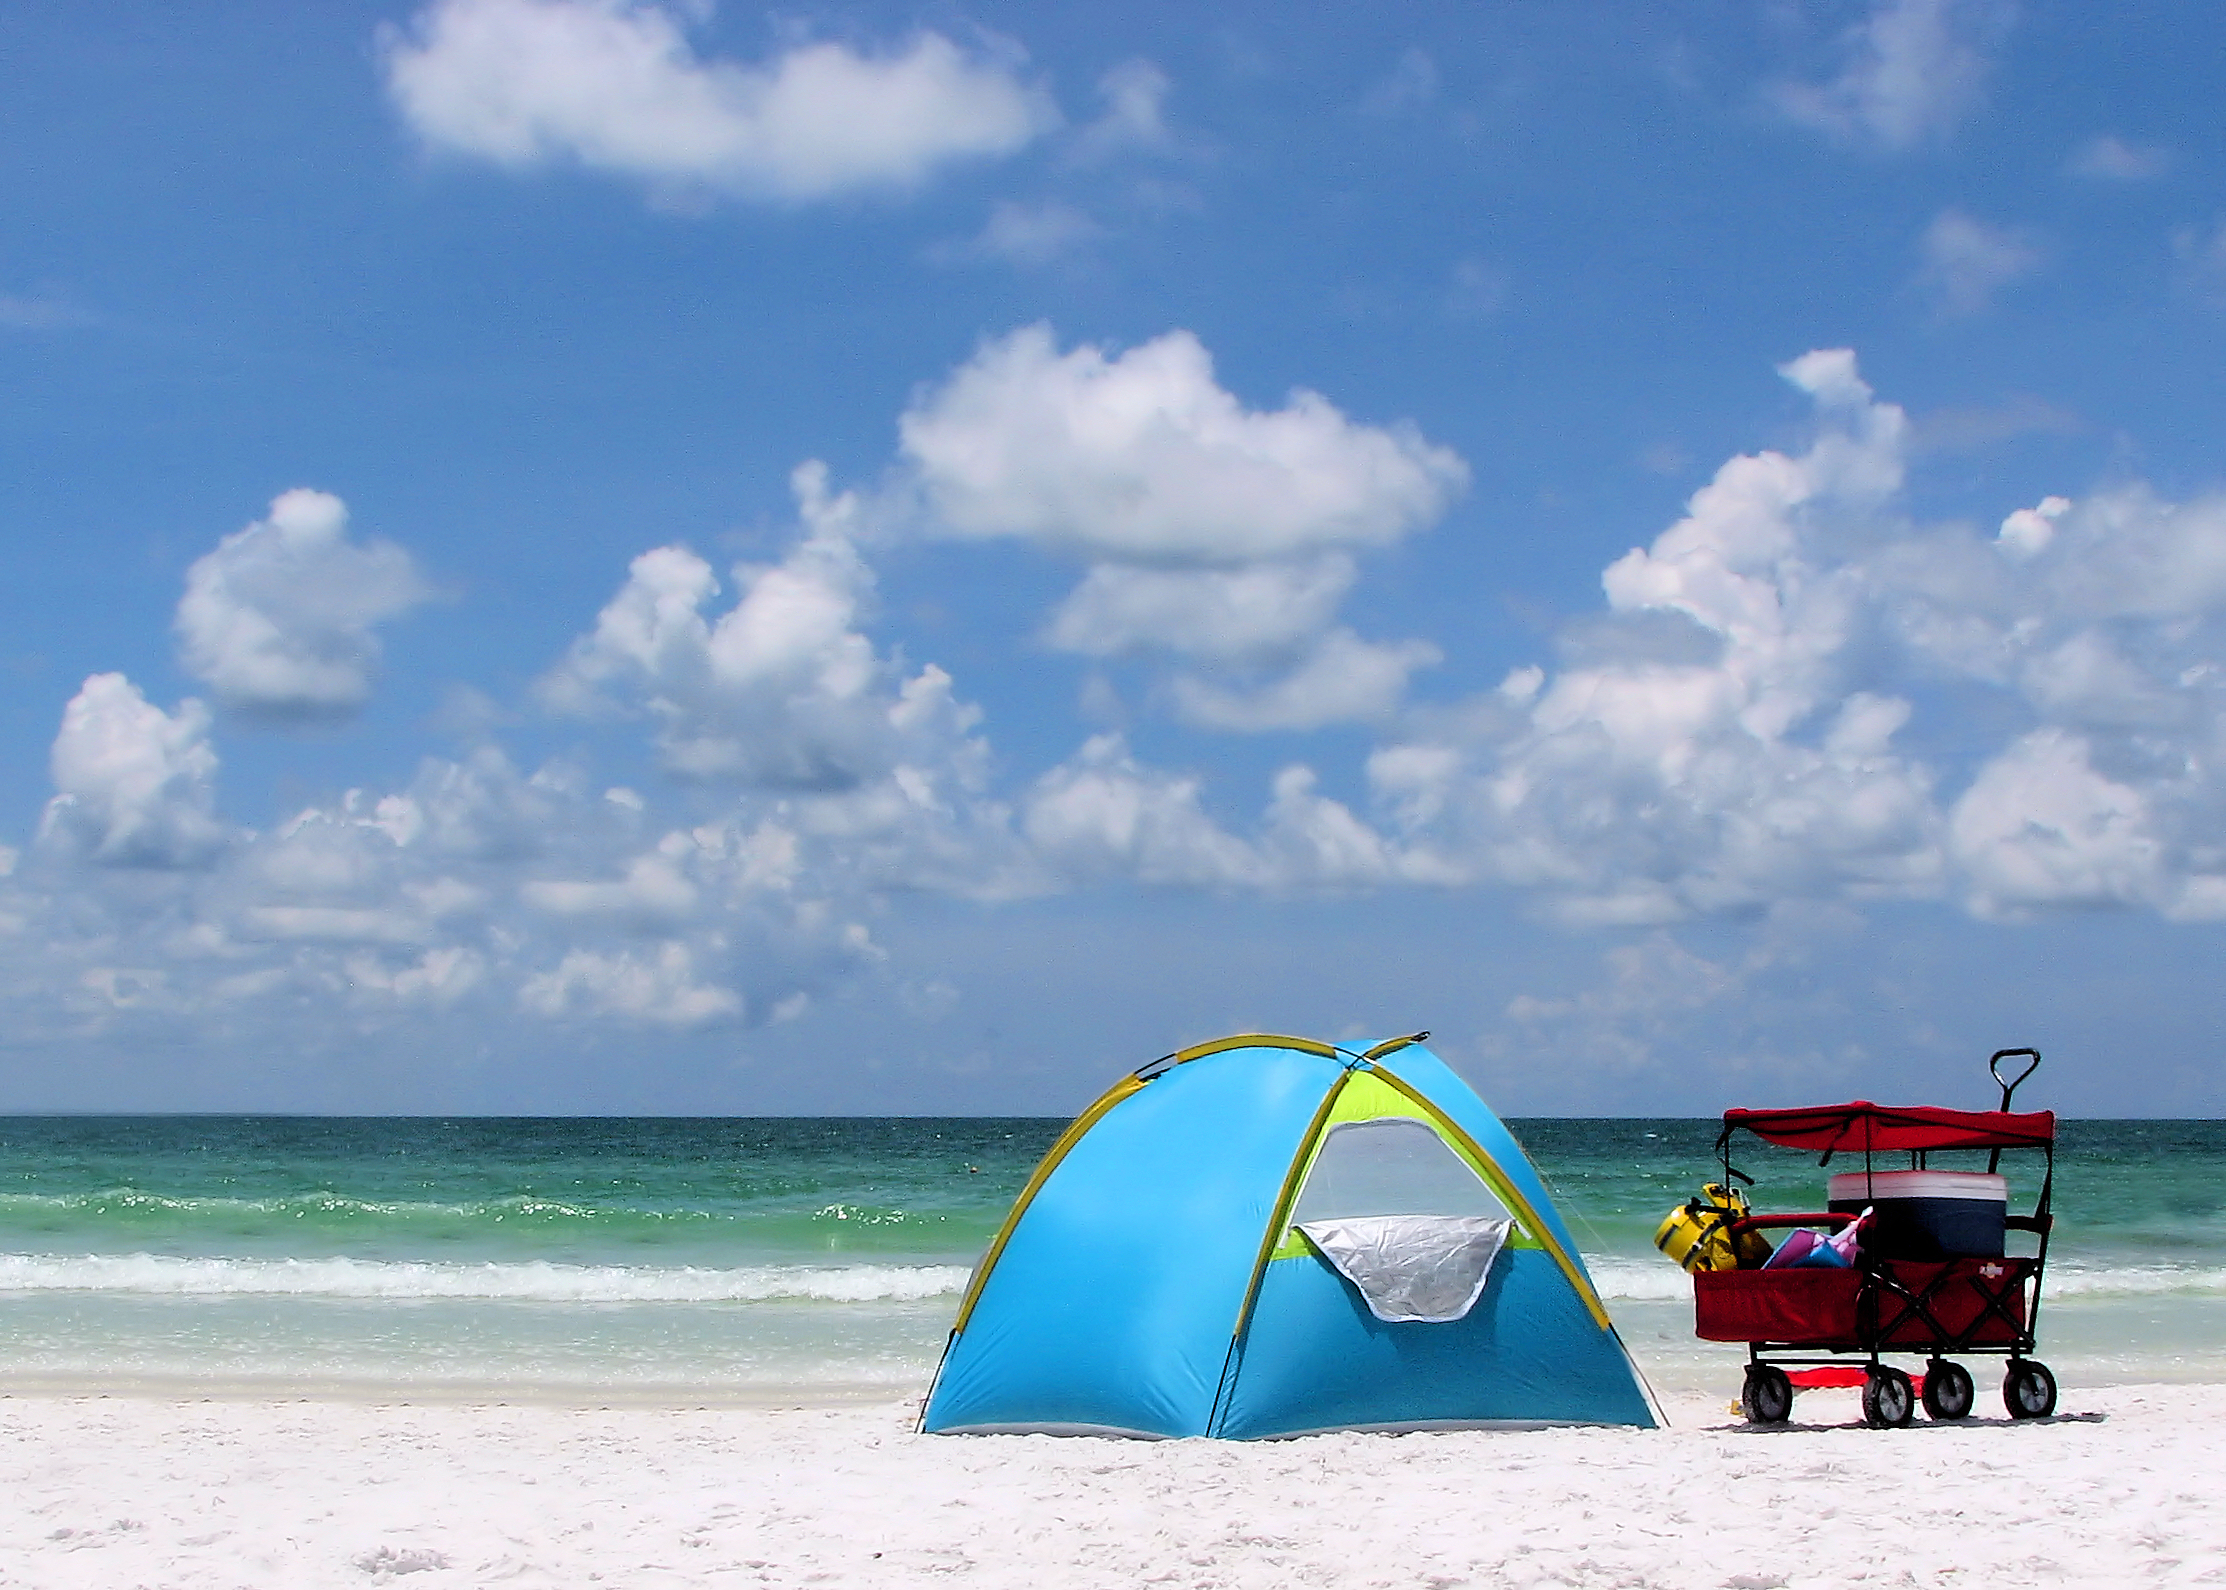 A tent and buggy on a beach photo